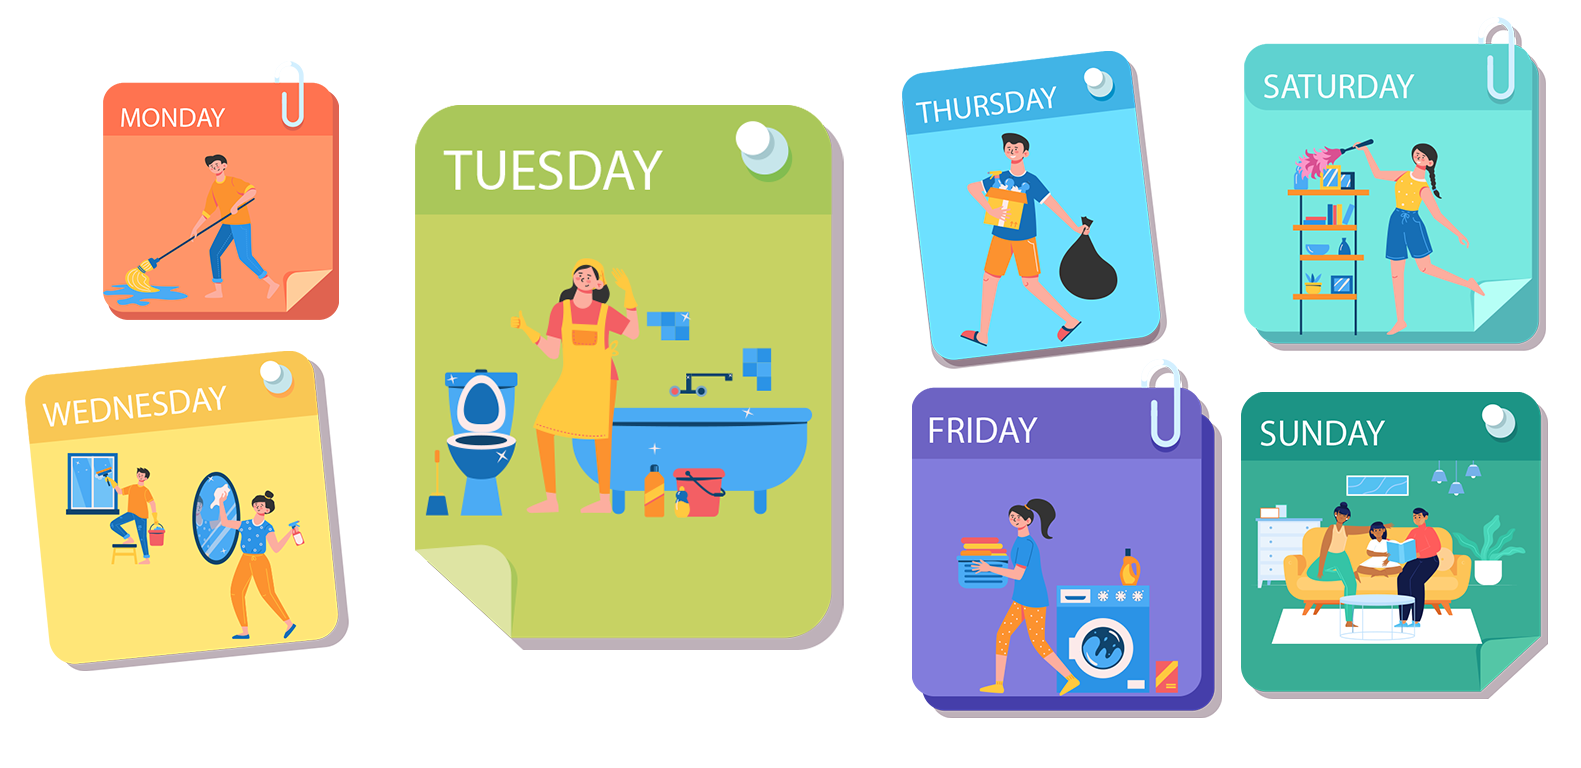 Try this 7-Day Weekly Cleaning Schedule for an Organized and Tidy Home